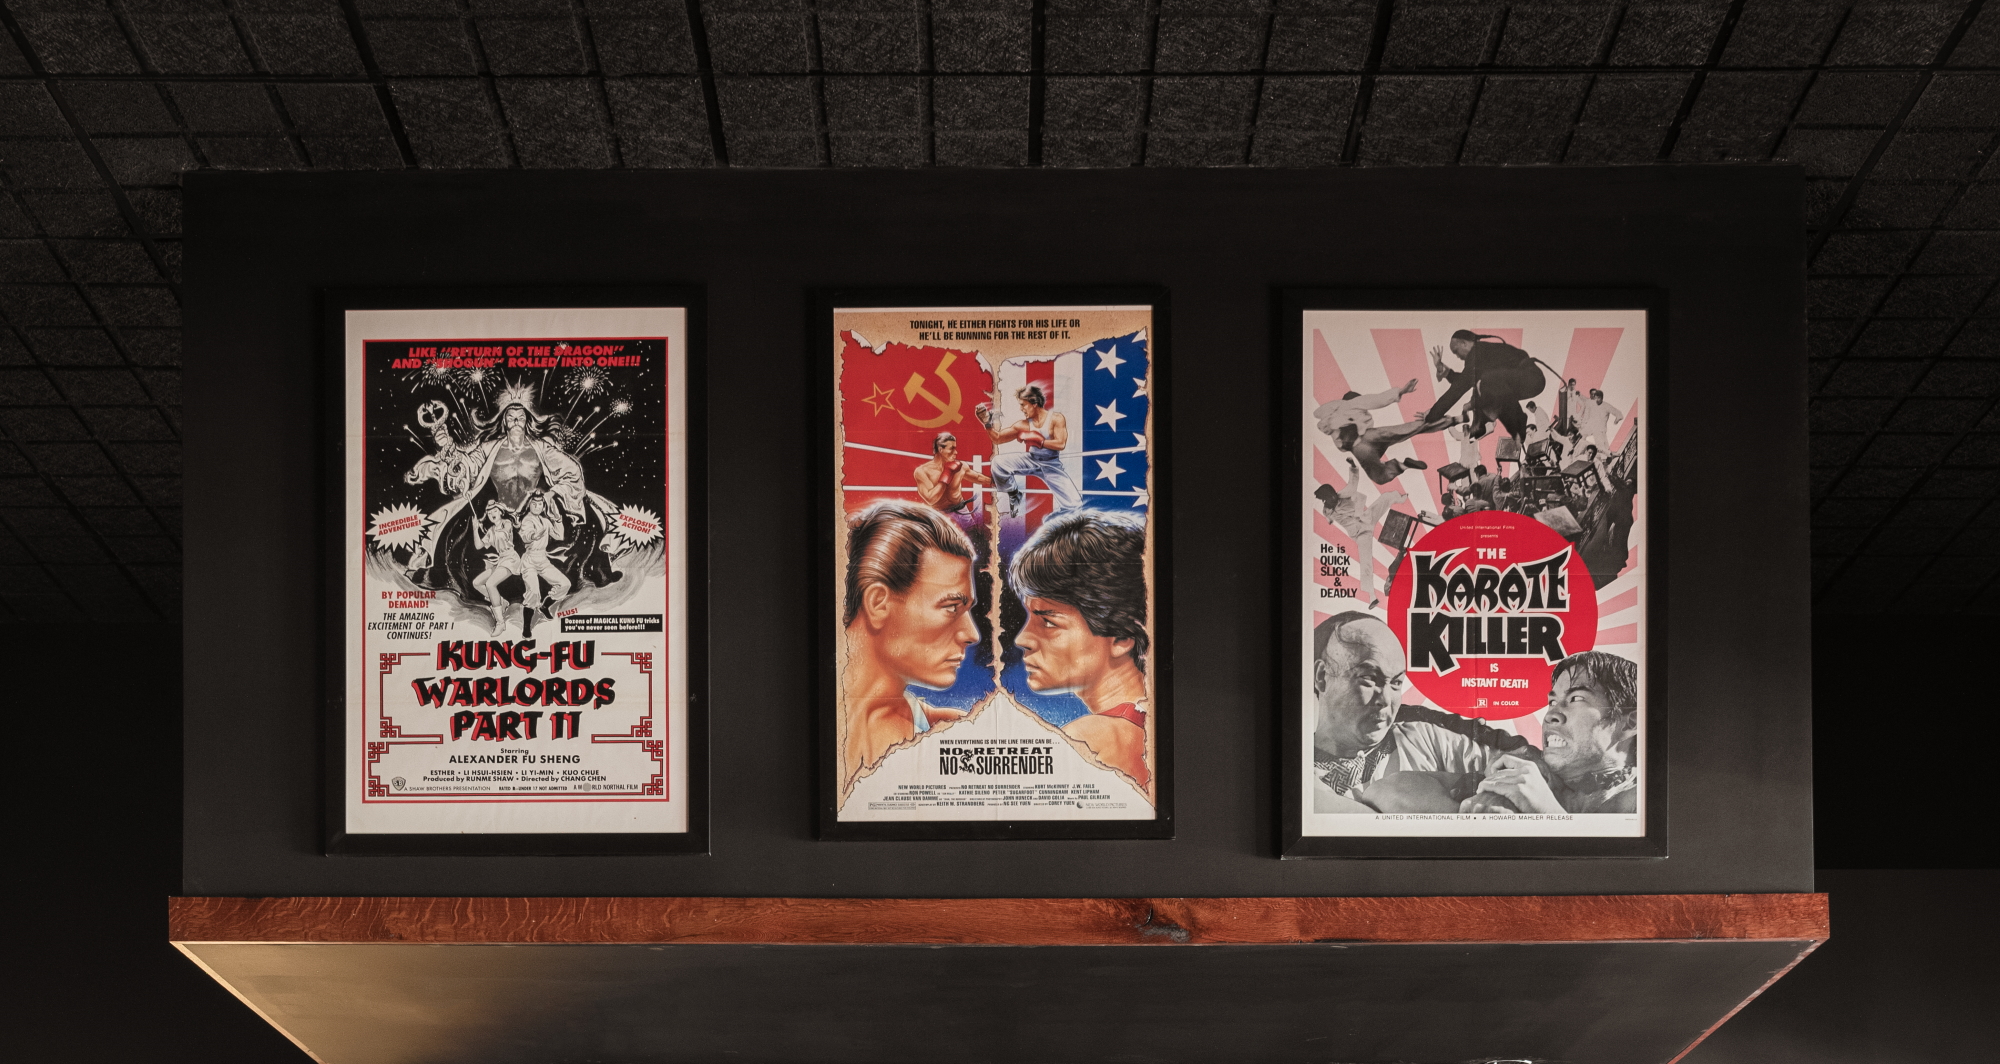 Hung up from left to right are posters for the movies "Kung-Fu Warlords Part II", "No Retreat, No Surrender", and "The Karate Killer"